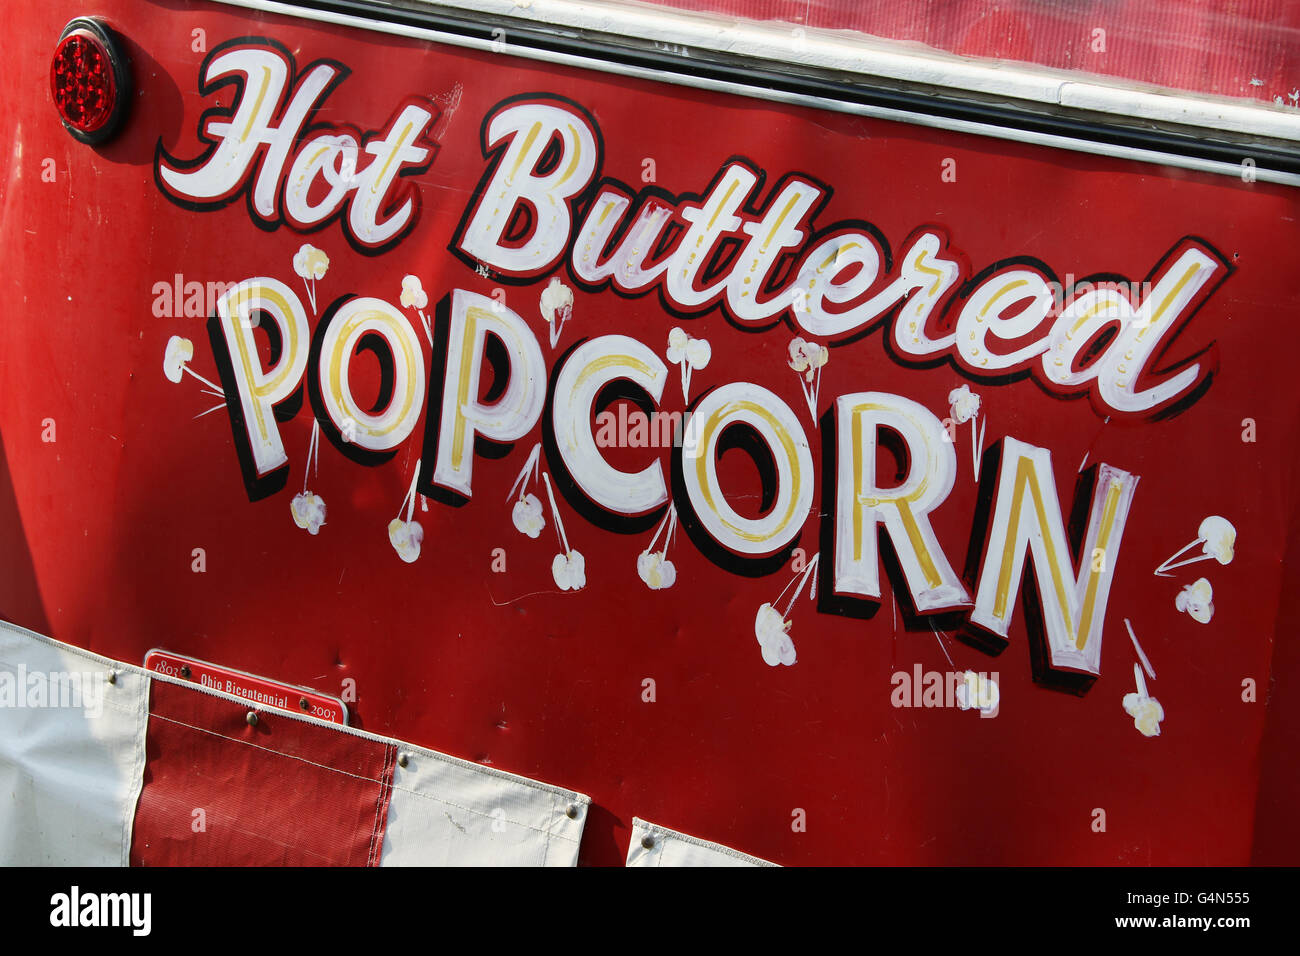 Tasty Popcorn Served Here Signage Colour Sign Printed Heavy Duty 4049